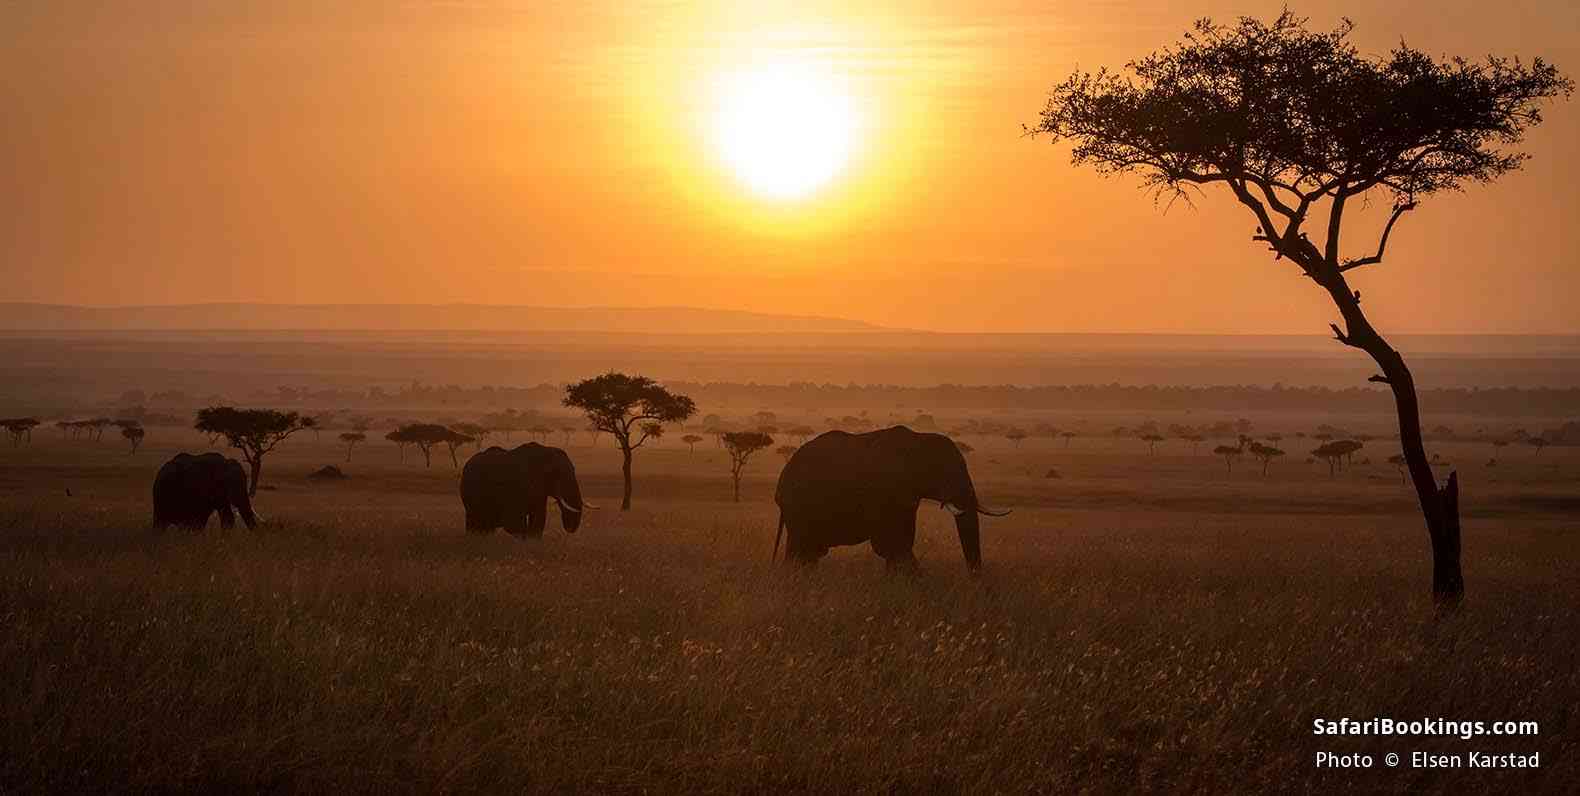 Elephants crossing the plains at sunset at Masai Mara Game Reserve